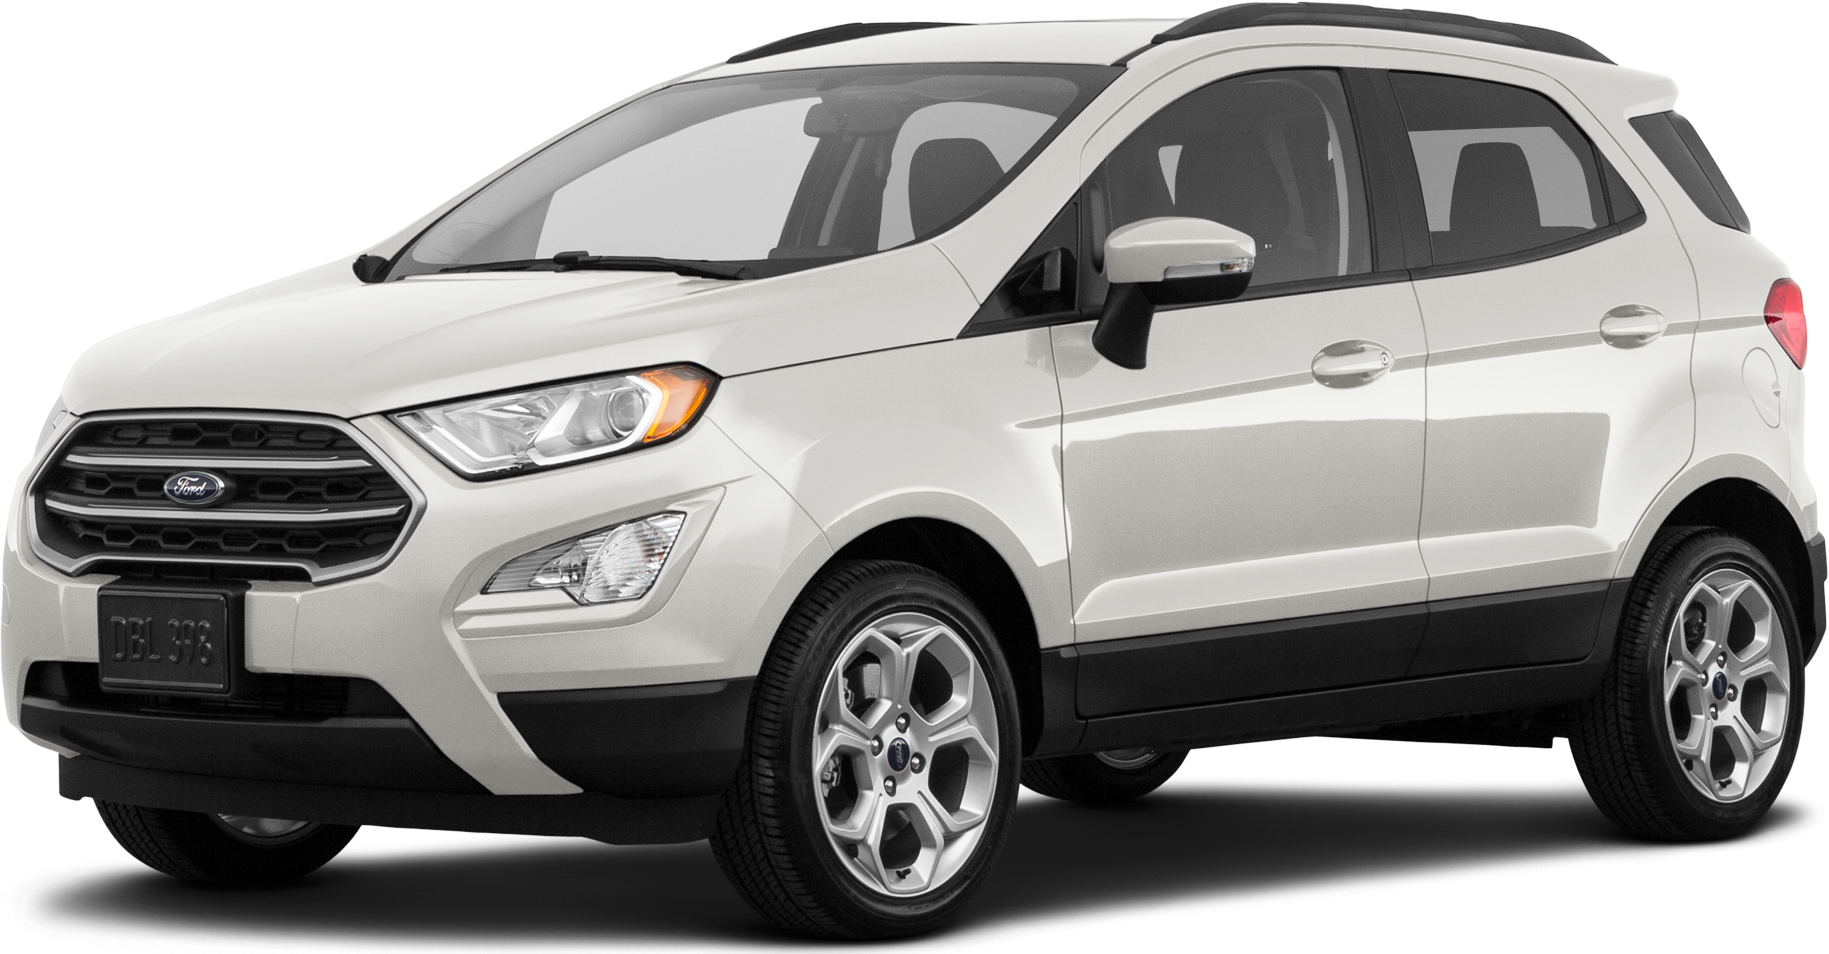 2021 Ford Escape Price, Value, Ratings & Reviews